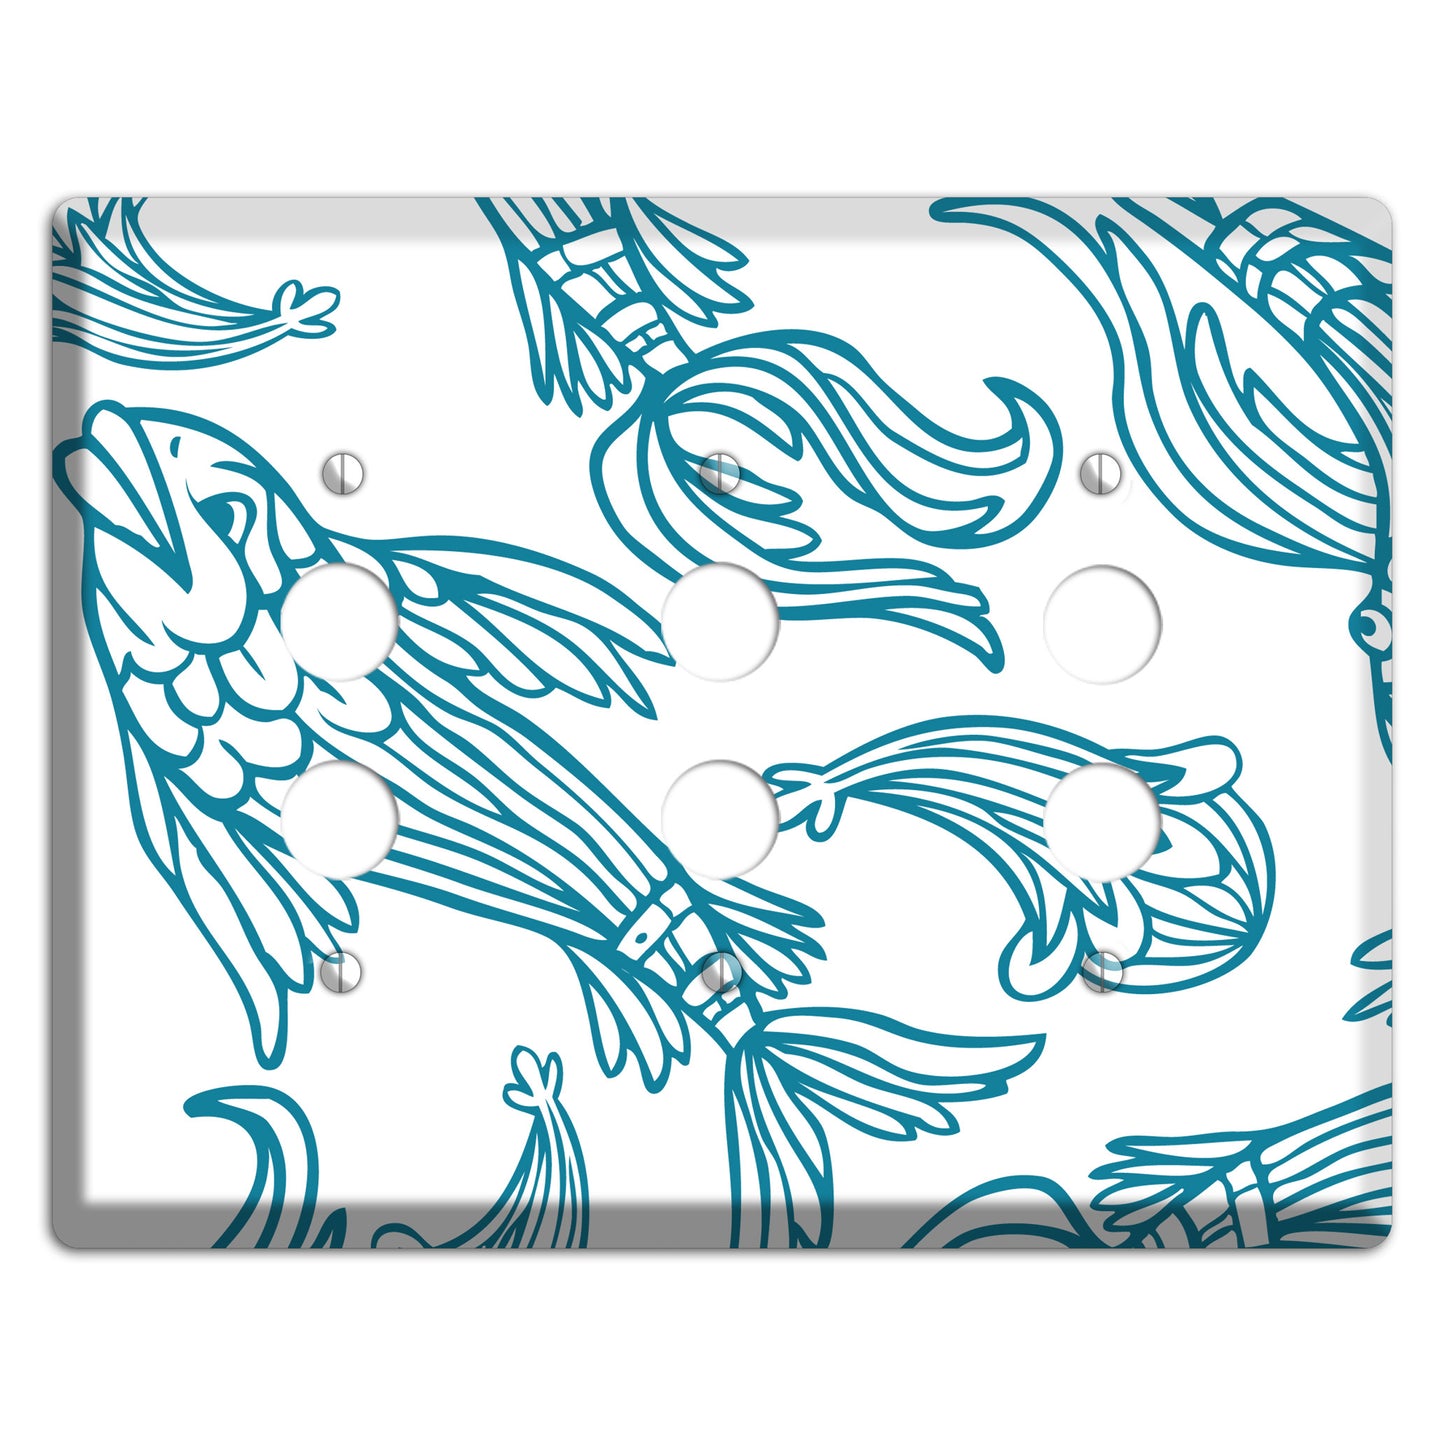 Teal and White Koi 3 Pushbutton Wallplate